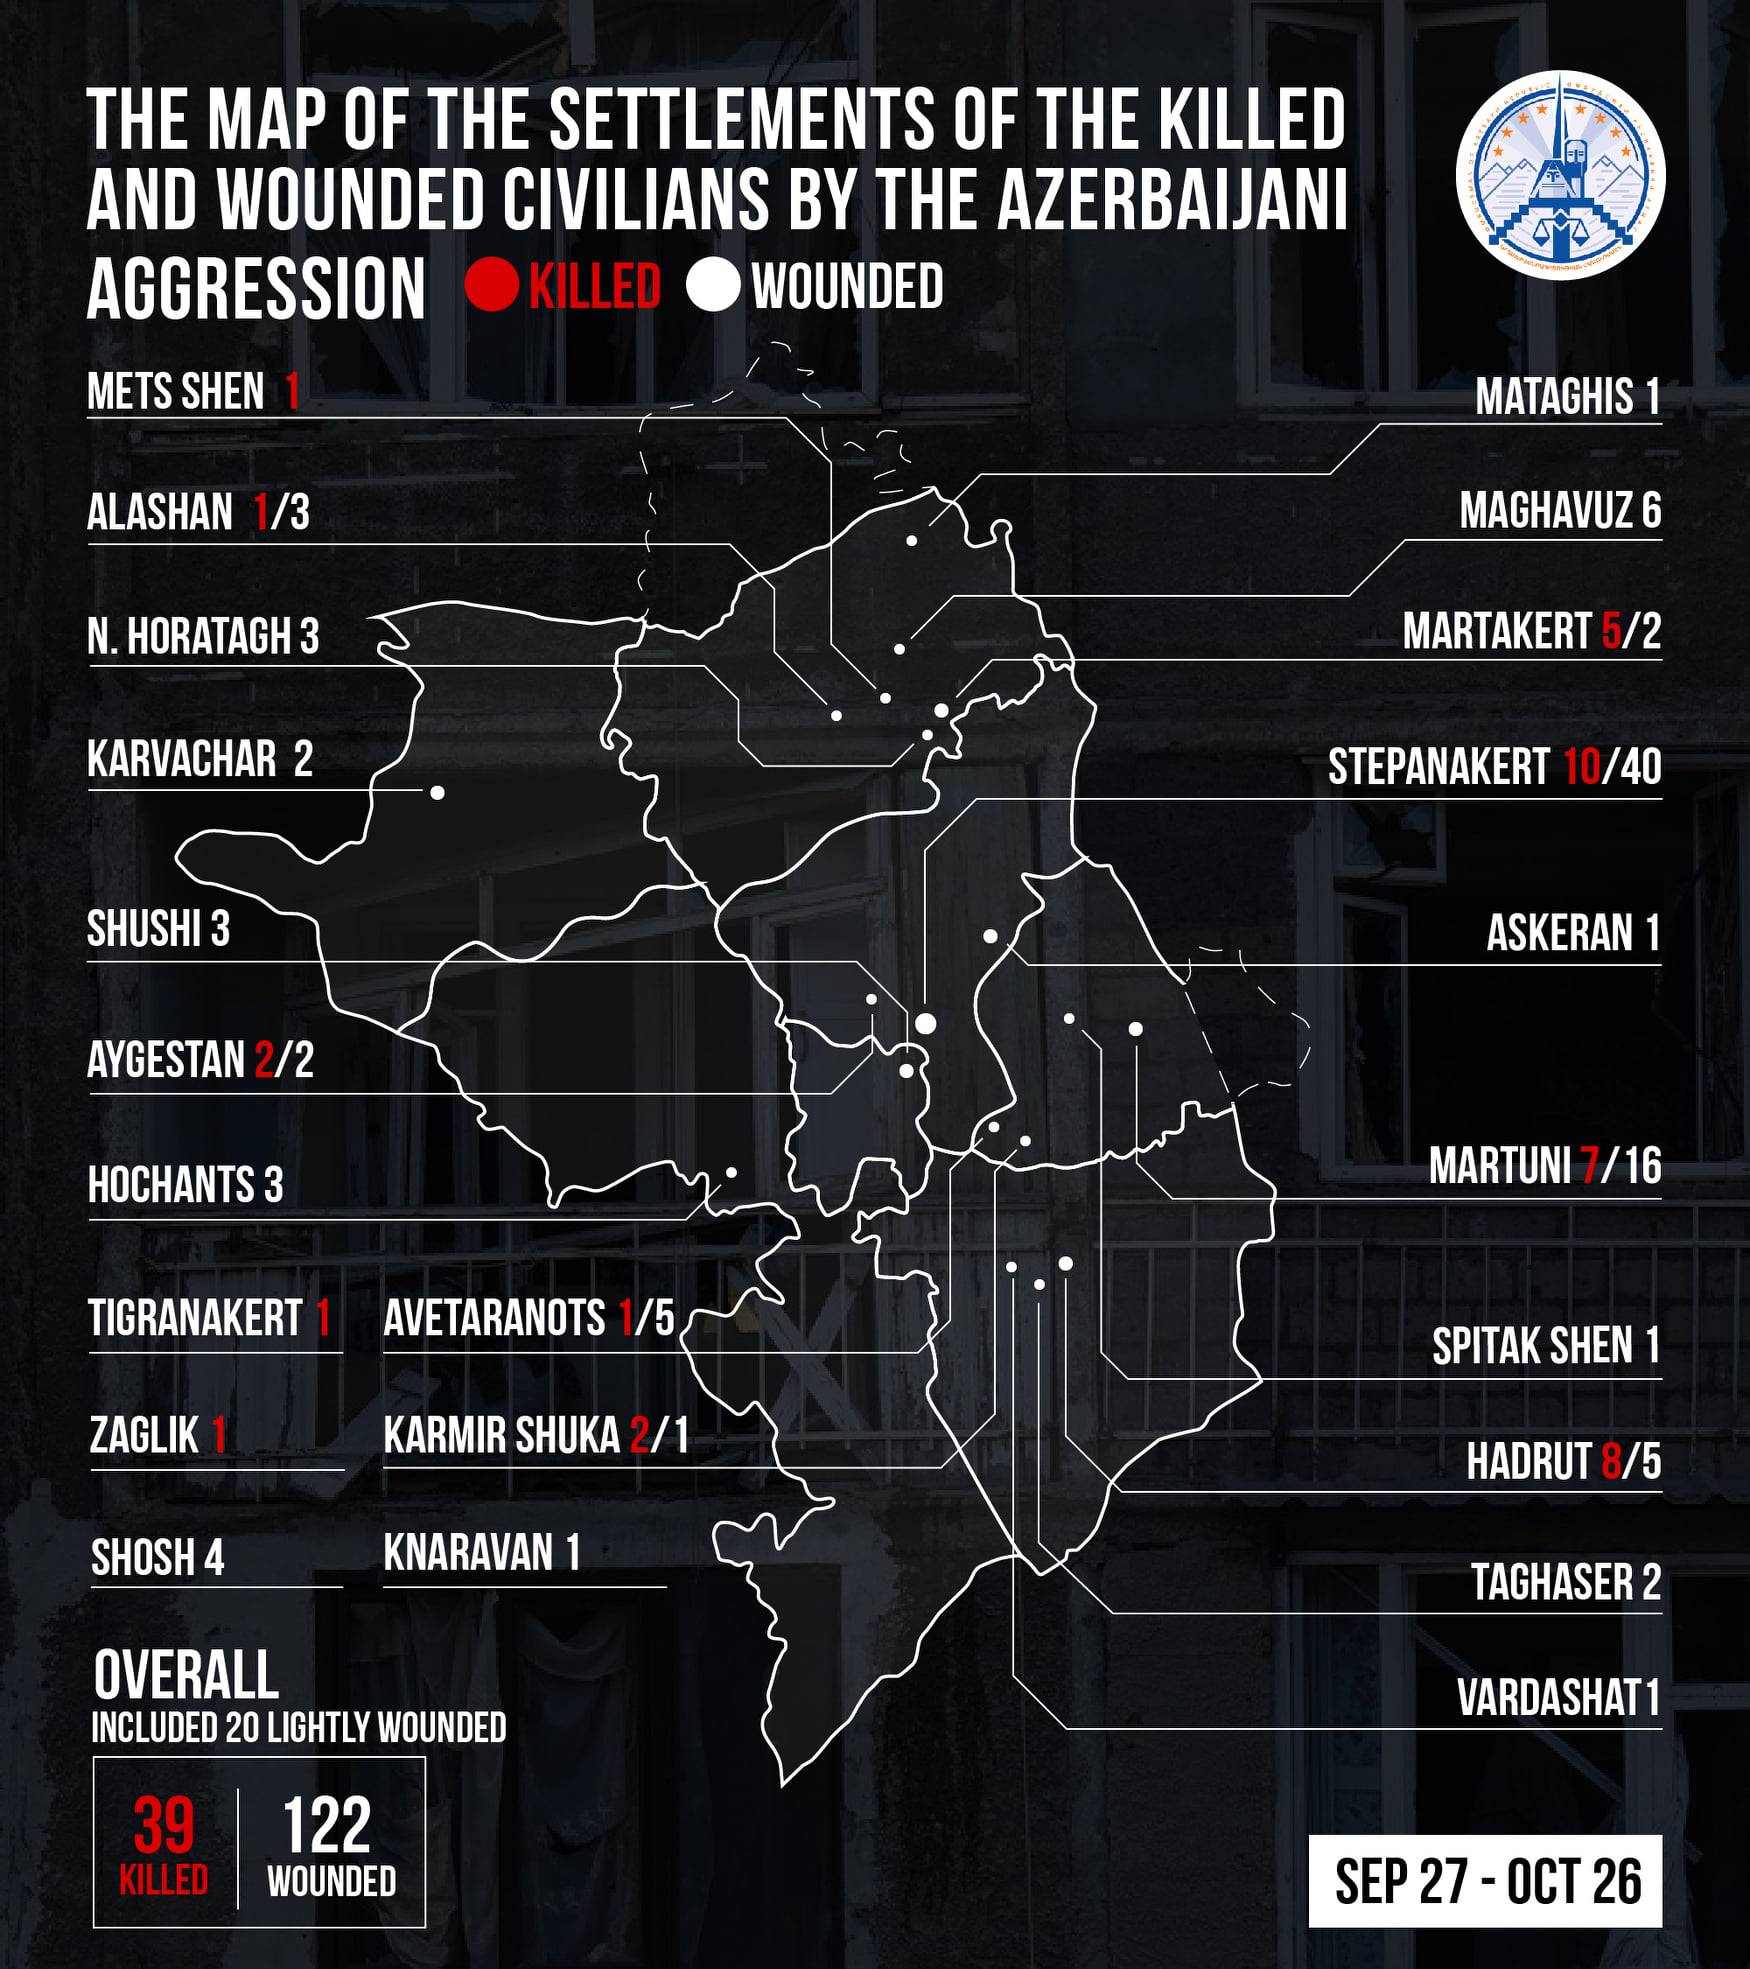 The map of the settlements of the killed and wounded civilians by the azerbaijani aggression.